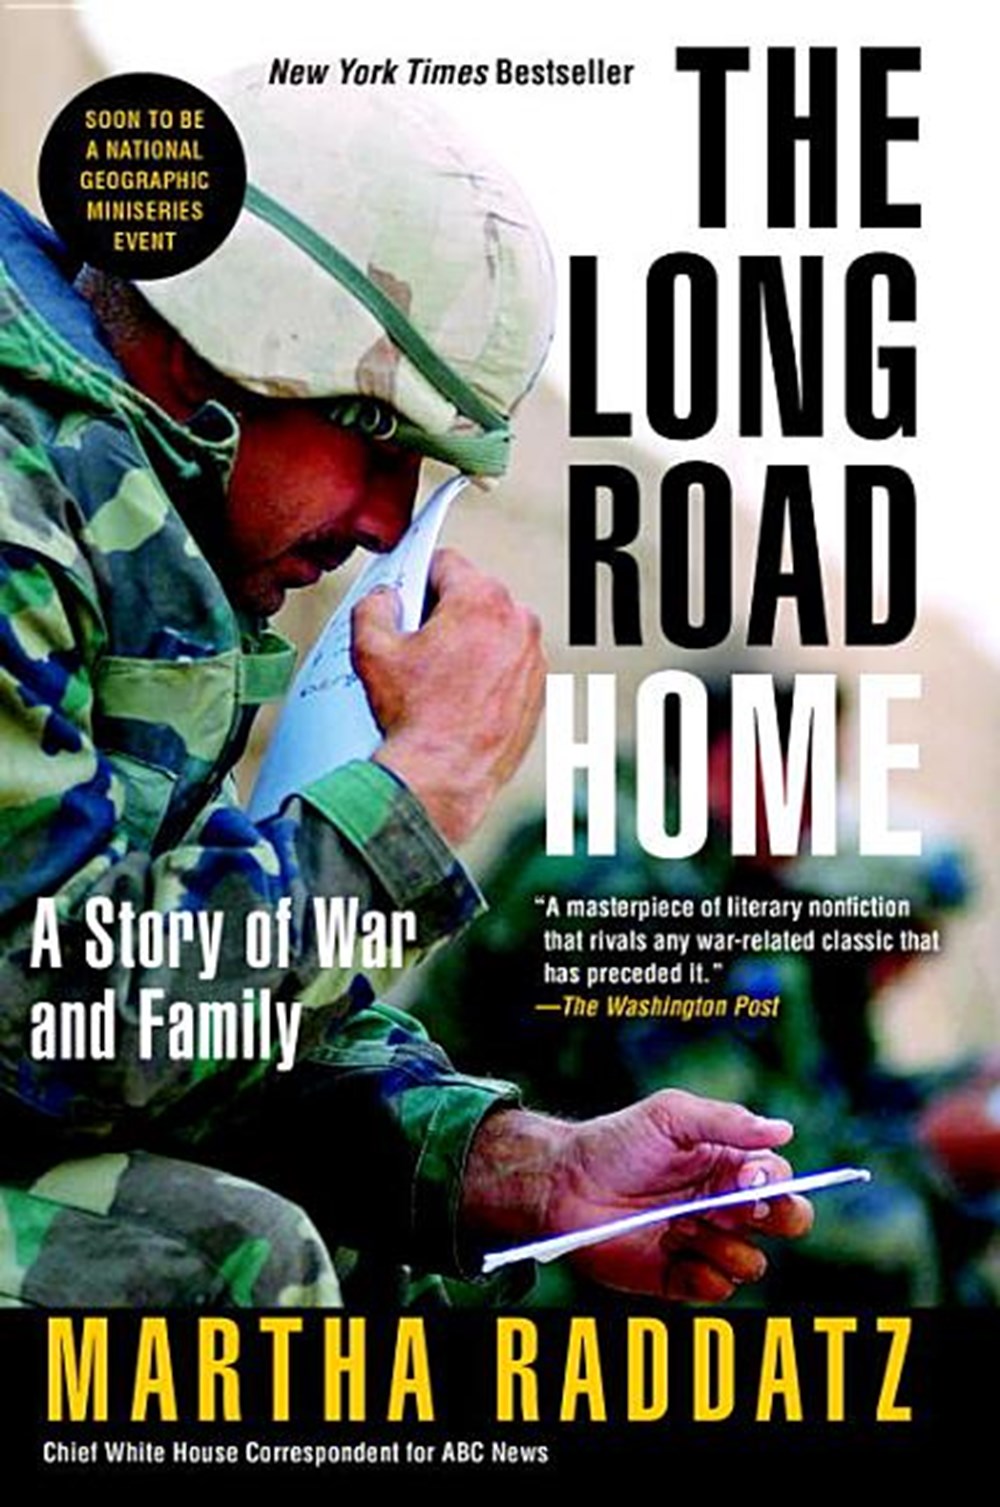 Long Road Home: A Story of War and Family